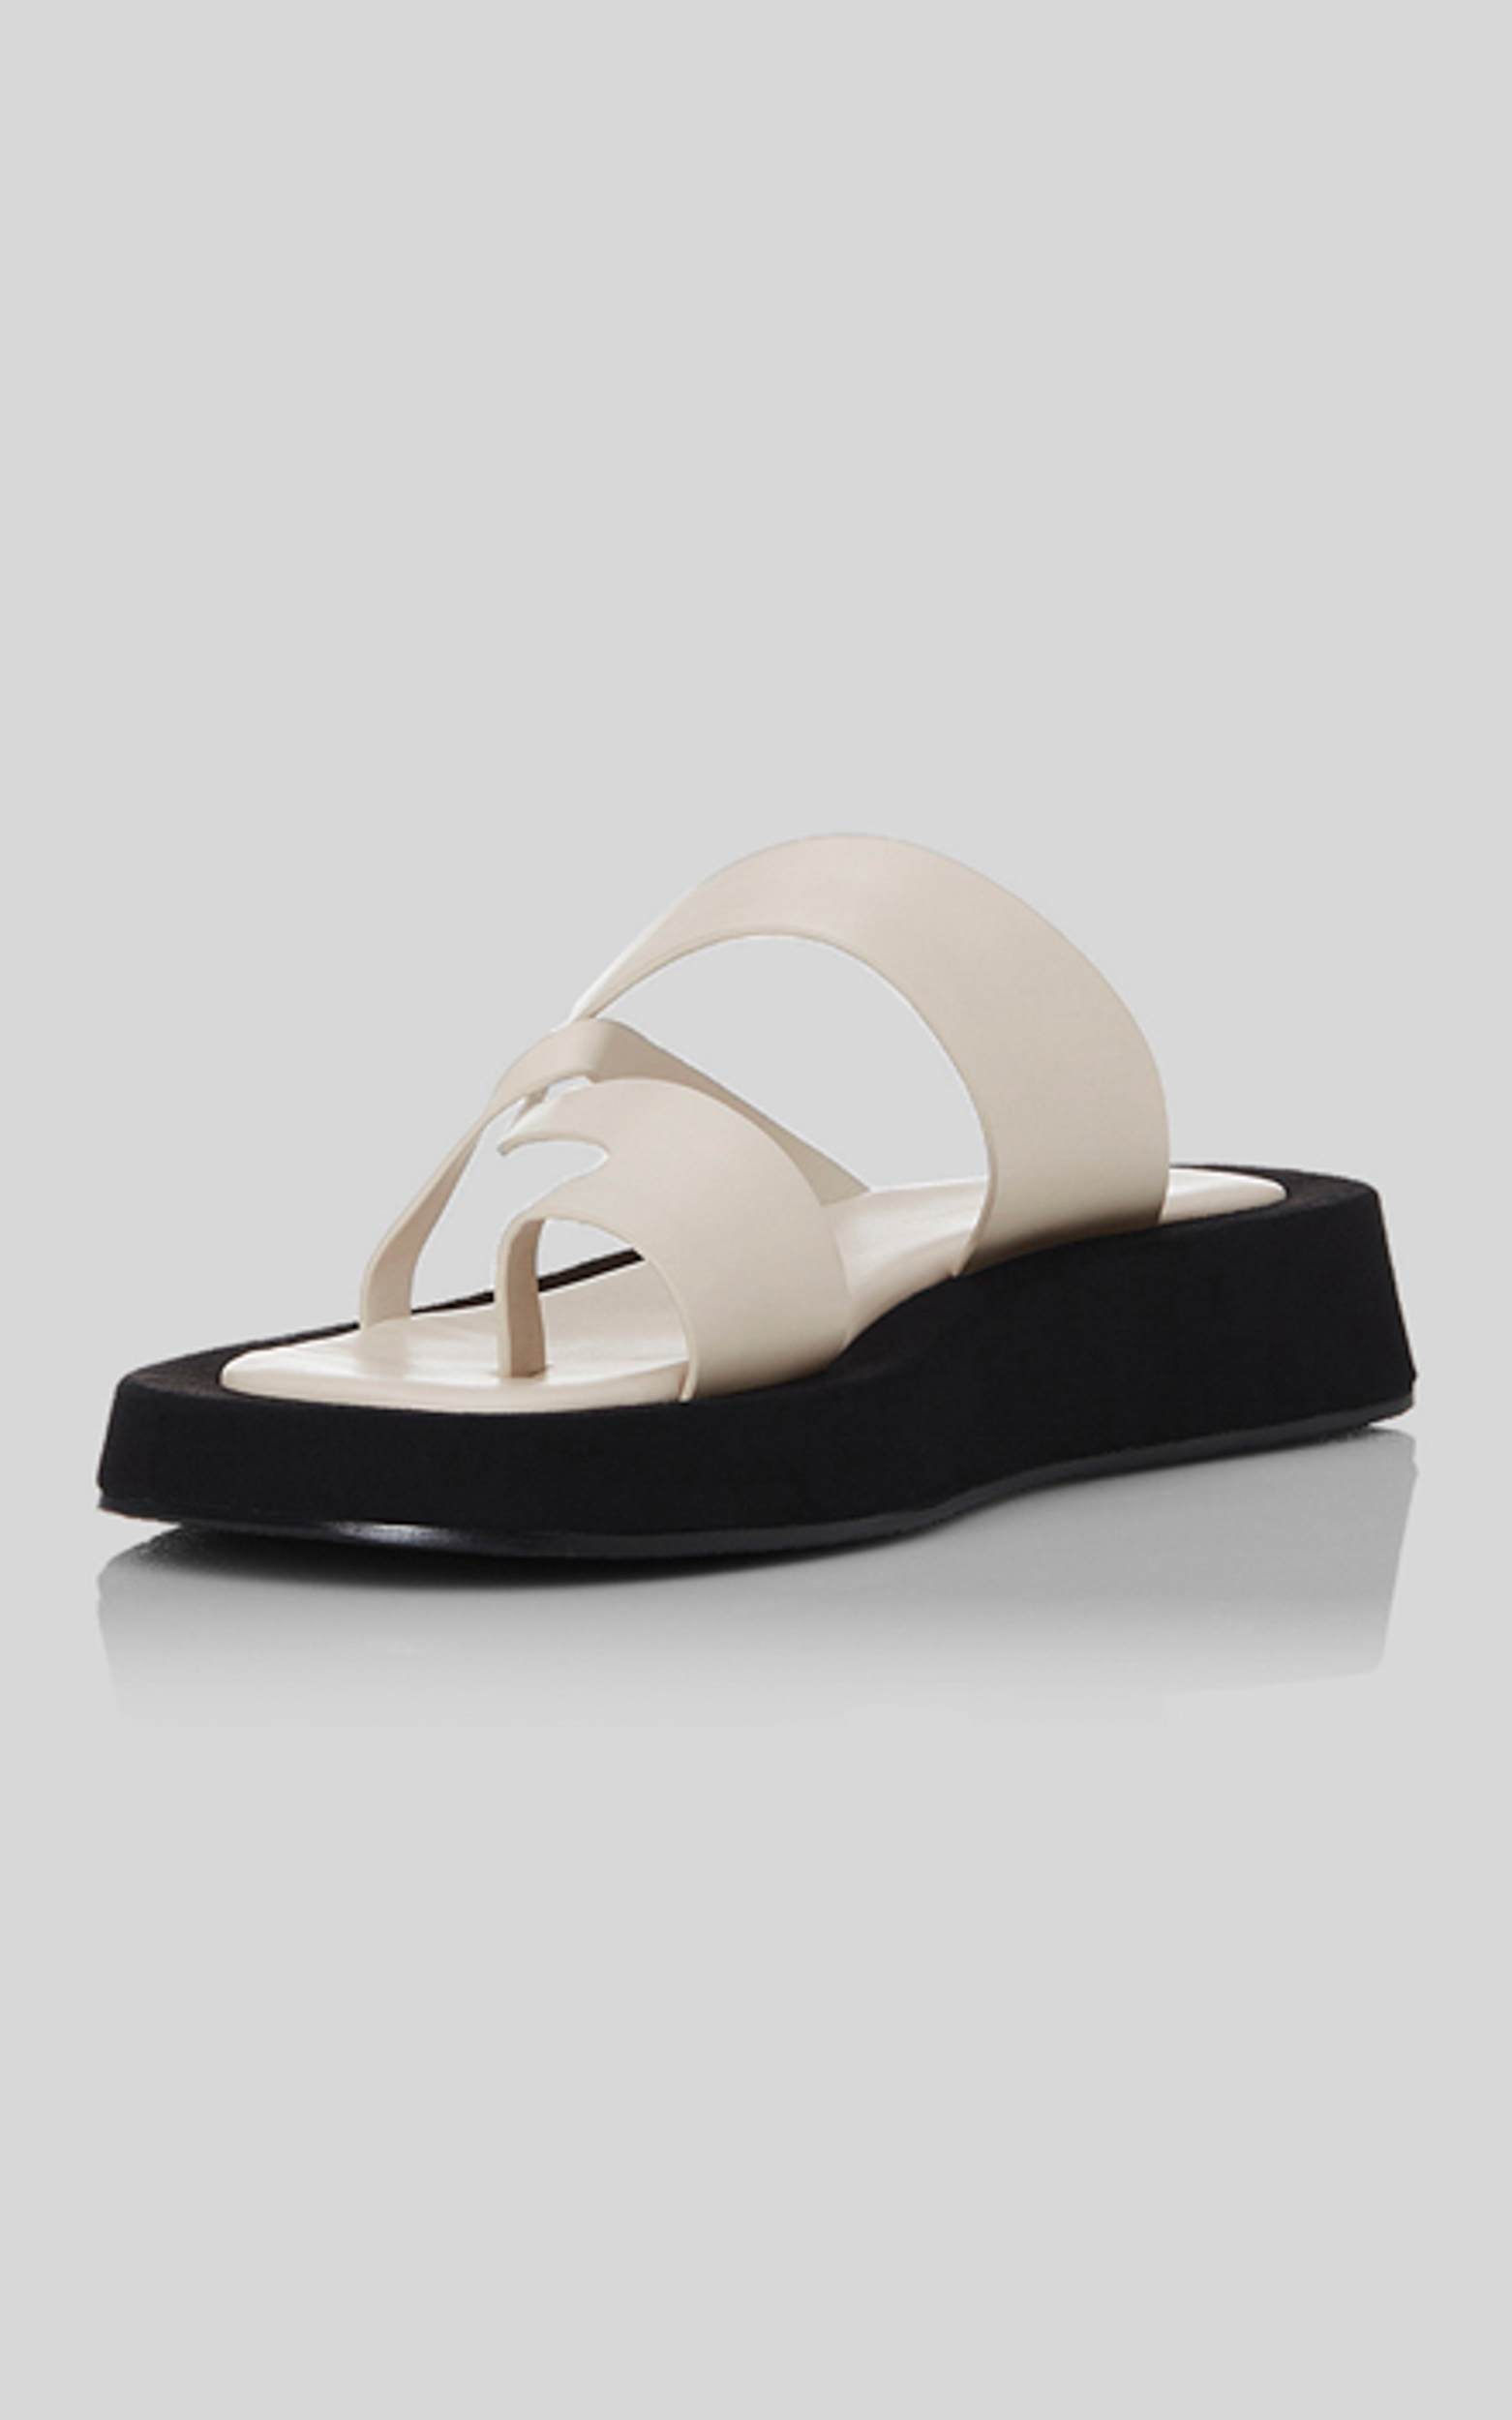 Alias Mae - Polo Sandals in Bone Leather - 05, NEU2, hi-res image number null